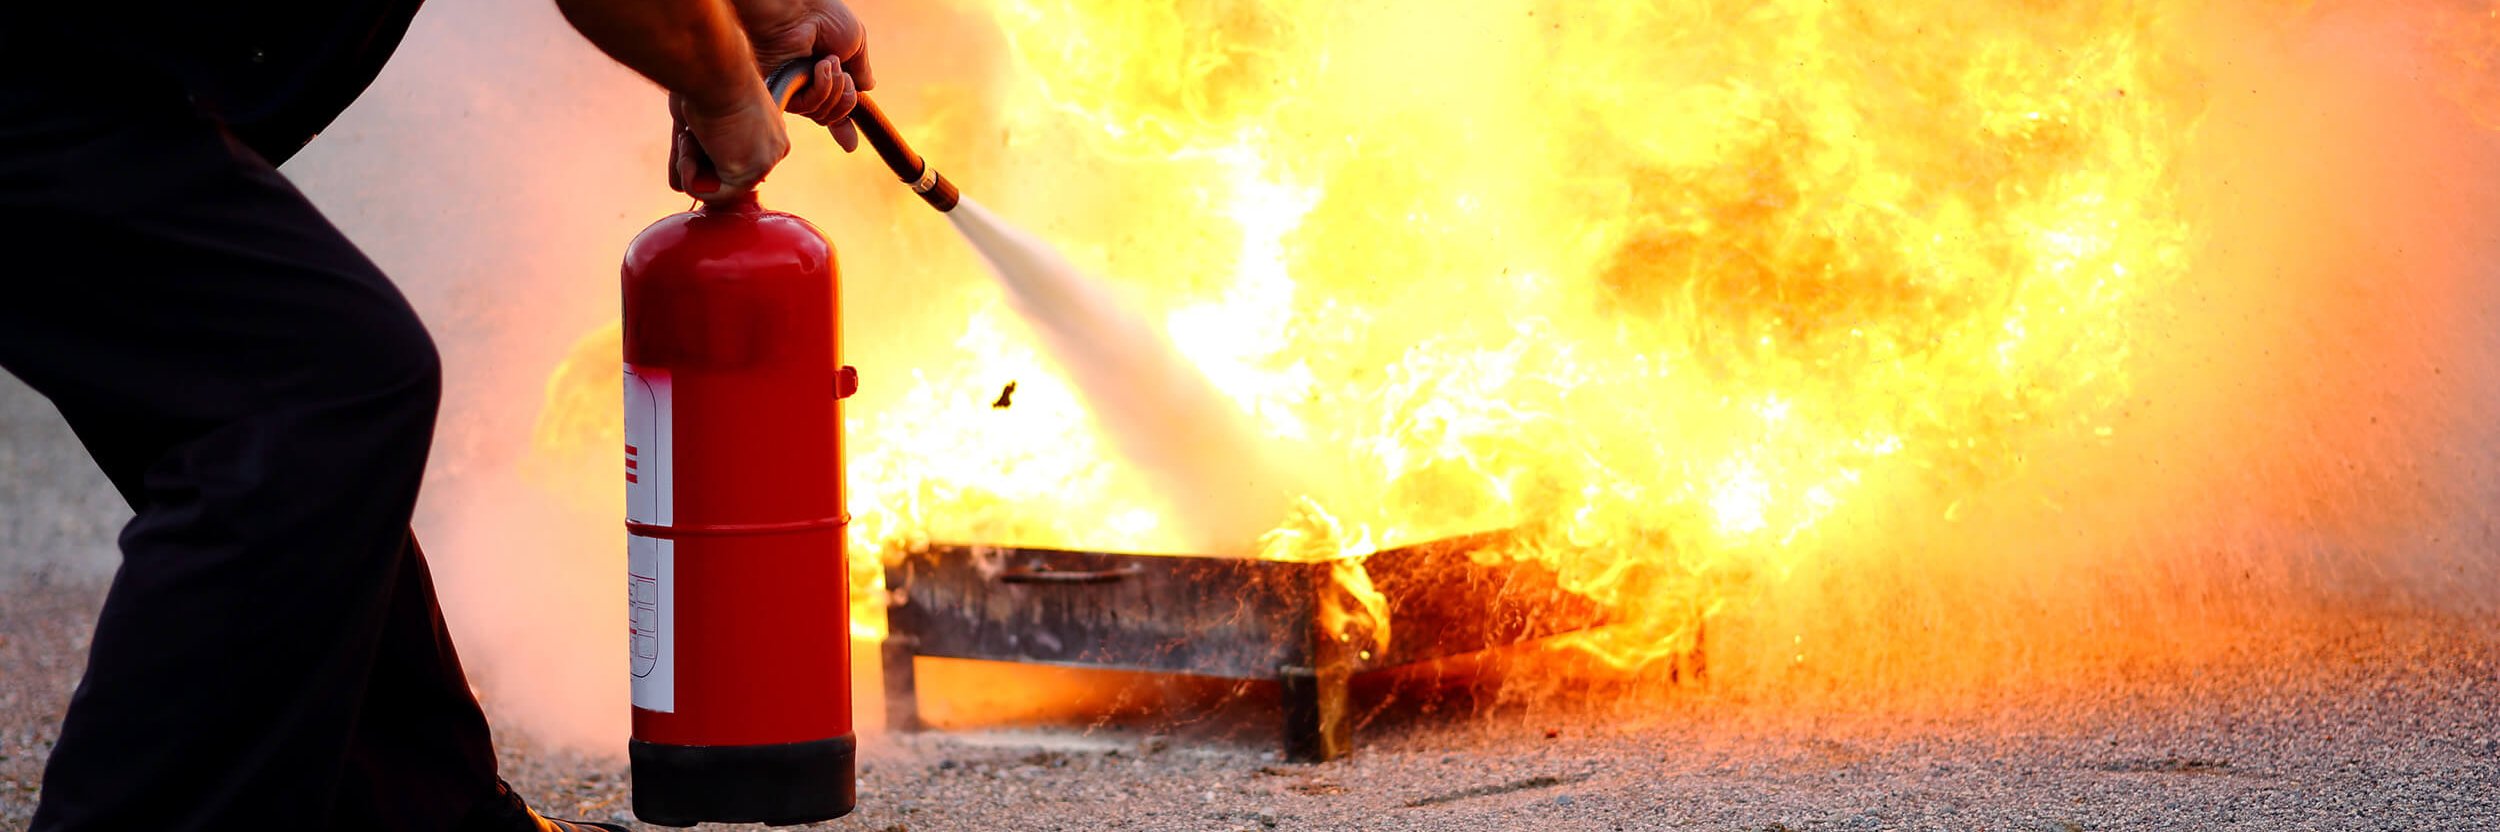 Fire protection training at your site